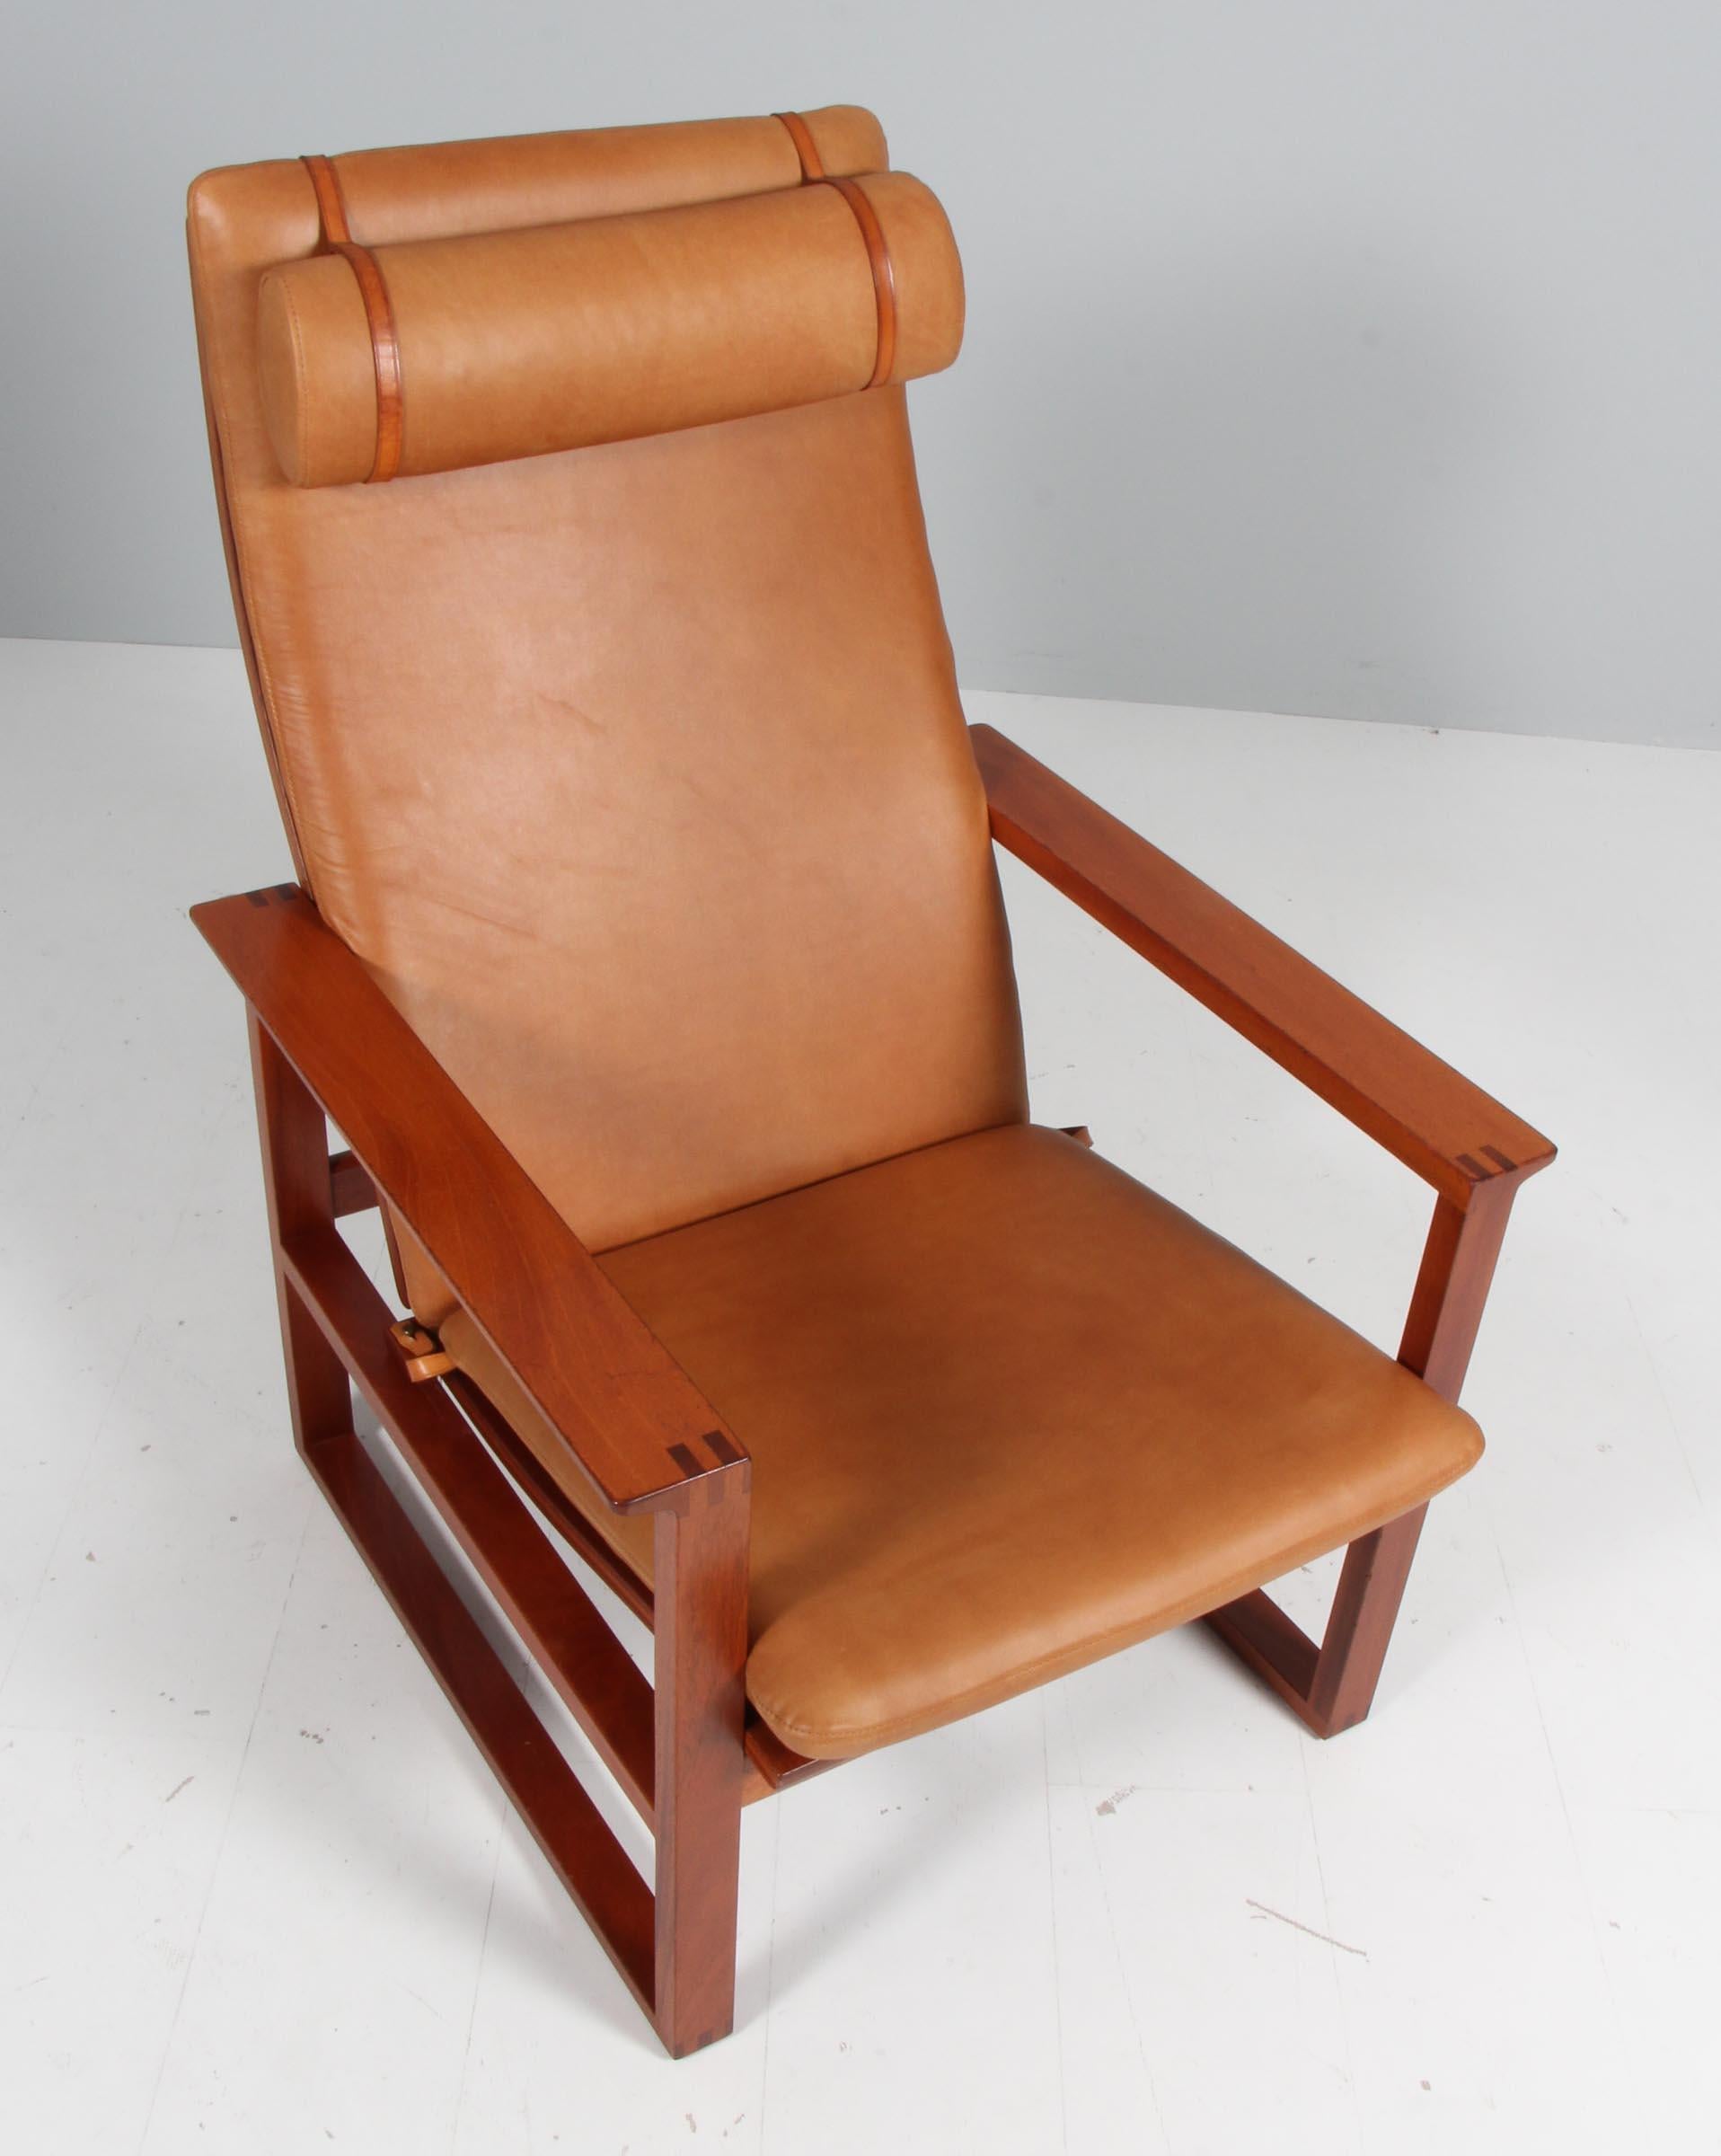 A Børge Mogensen lounge chairs designed in 1956 model number 2254 for Fredericia Stolefabrik. Cubical frames made of solid mahogany with finger joints and cane. 

Reupholstered in vintage tan aniline leather. The seat cushion can be fixed with a